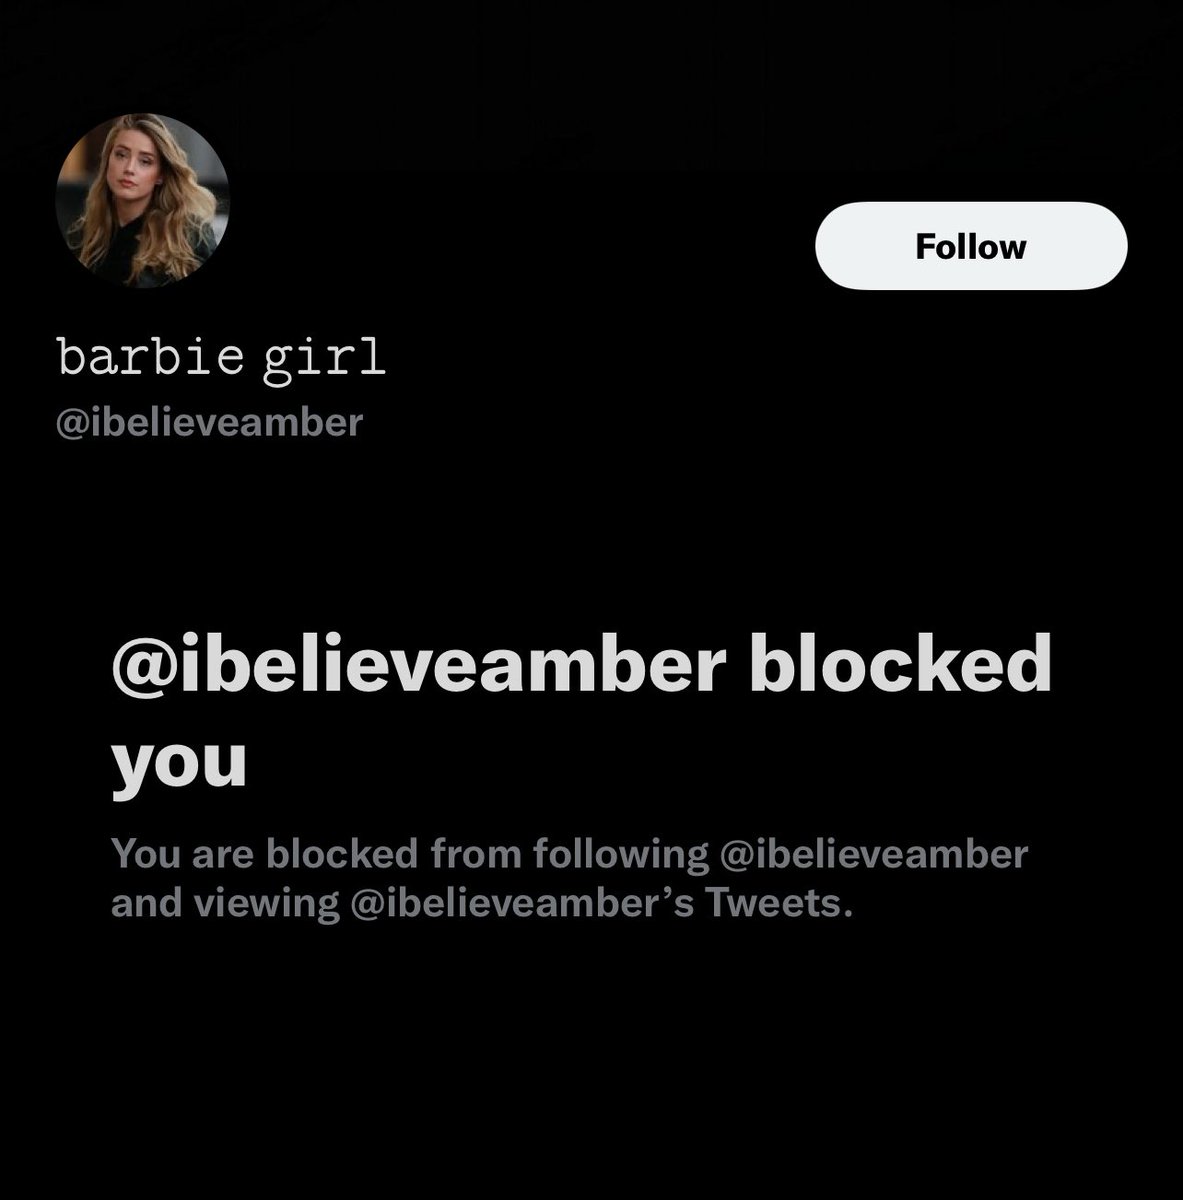 WOW!! Another bites the dust… 😂🤣

#AmberHeardIsFinished #AmberTurd #AmberHeardIsAHusbandBeater #AmberHeardIsAWifeBeater #AmberHeardIsANarcissist #AmberHeardlsAnAbuser